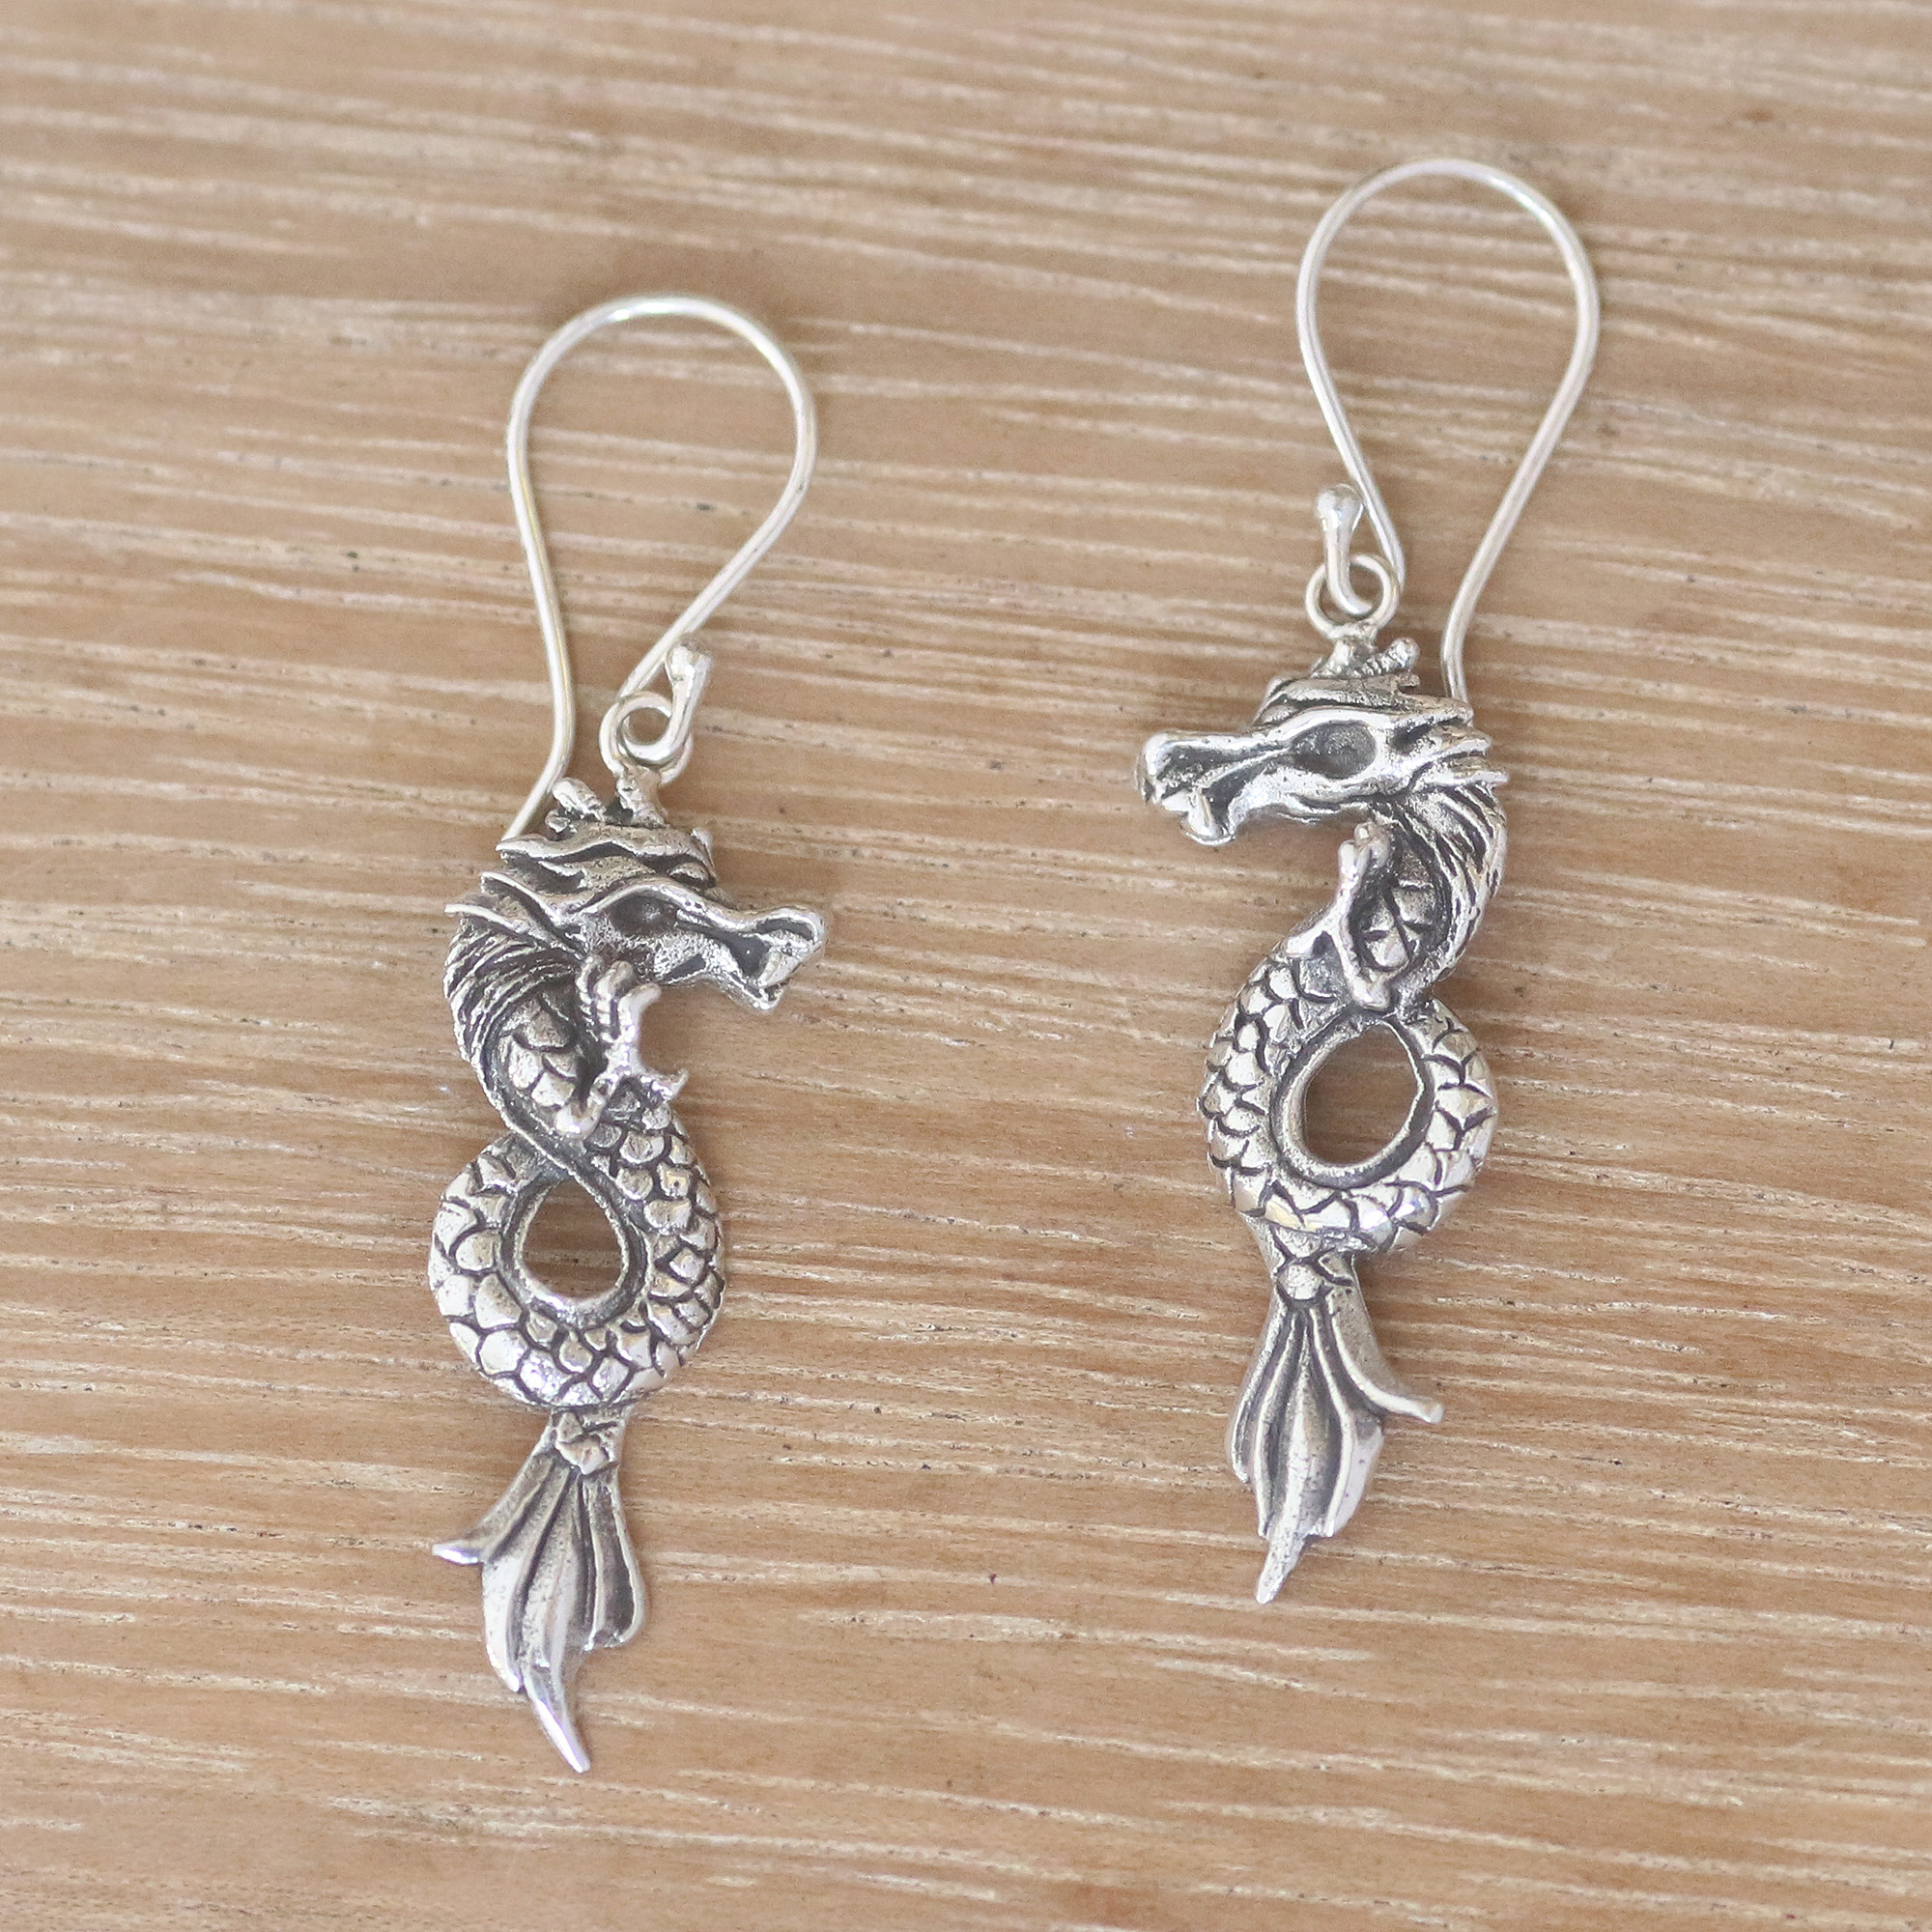 Handcrafted Sterling Silver Dragon Dangle Earrings - Dramatic Dragons ...